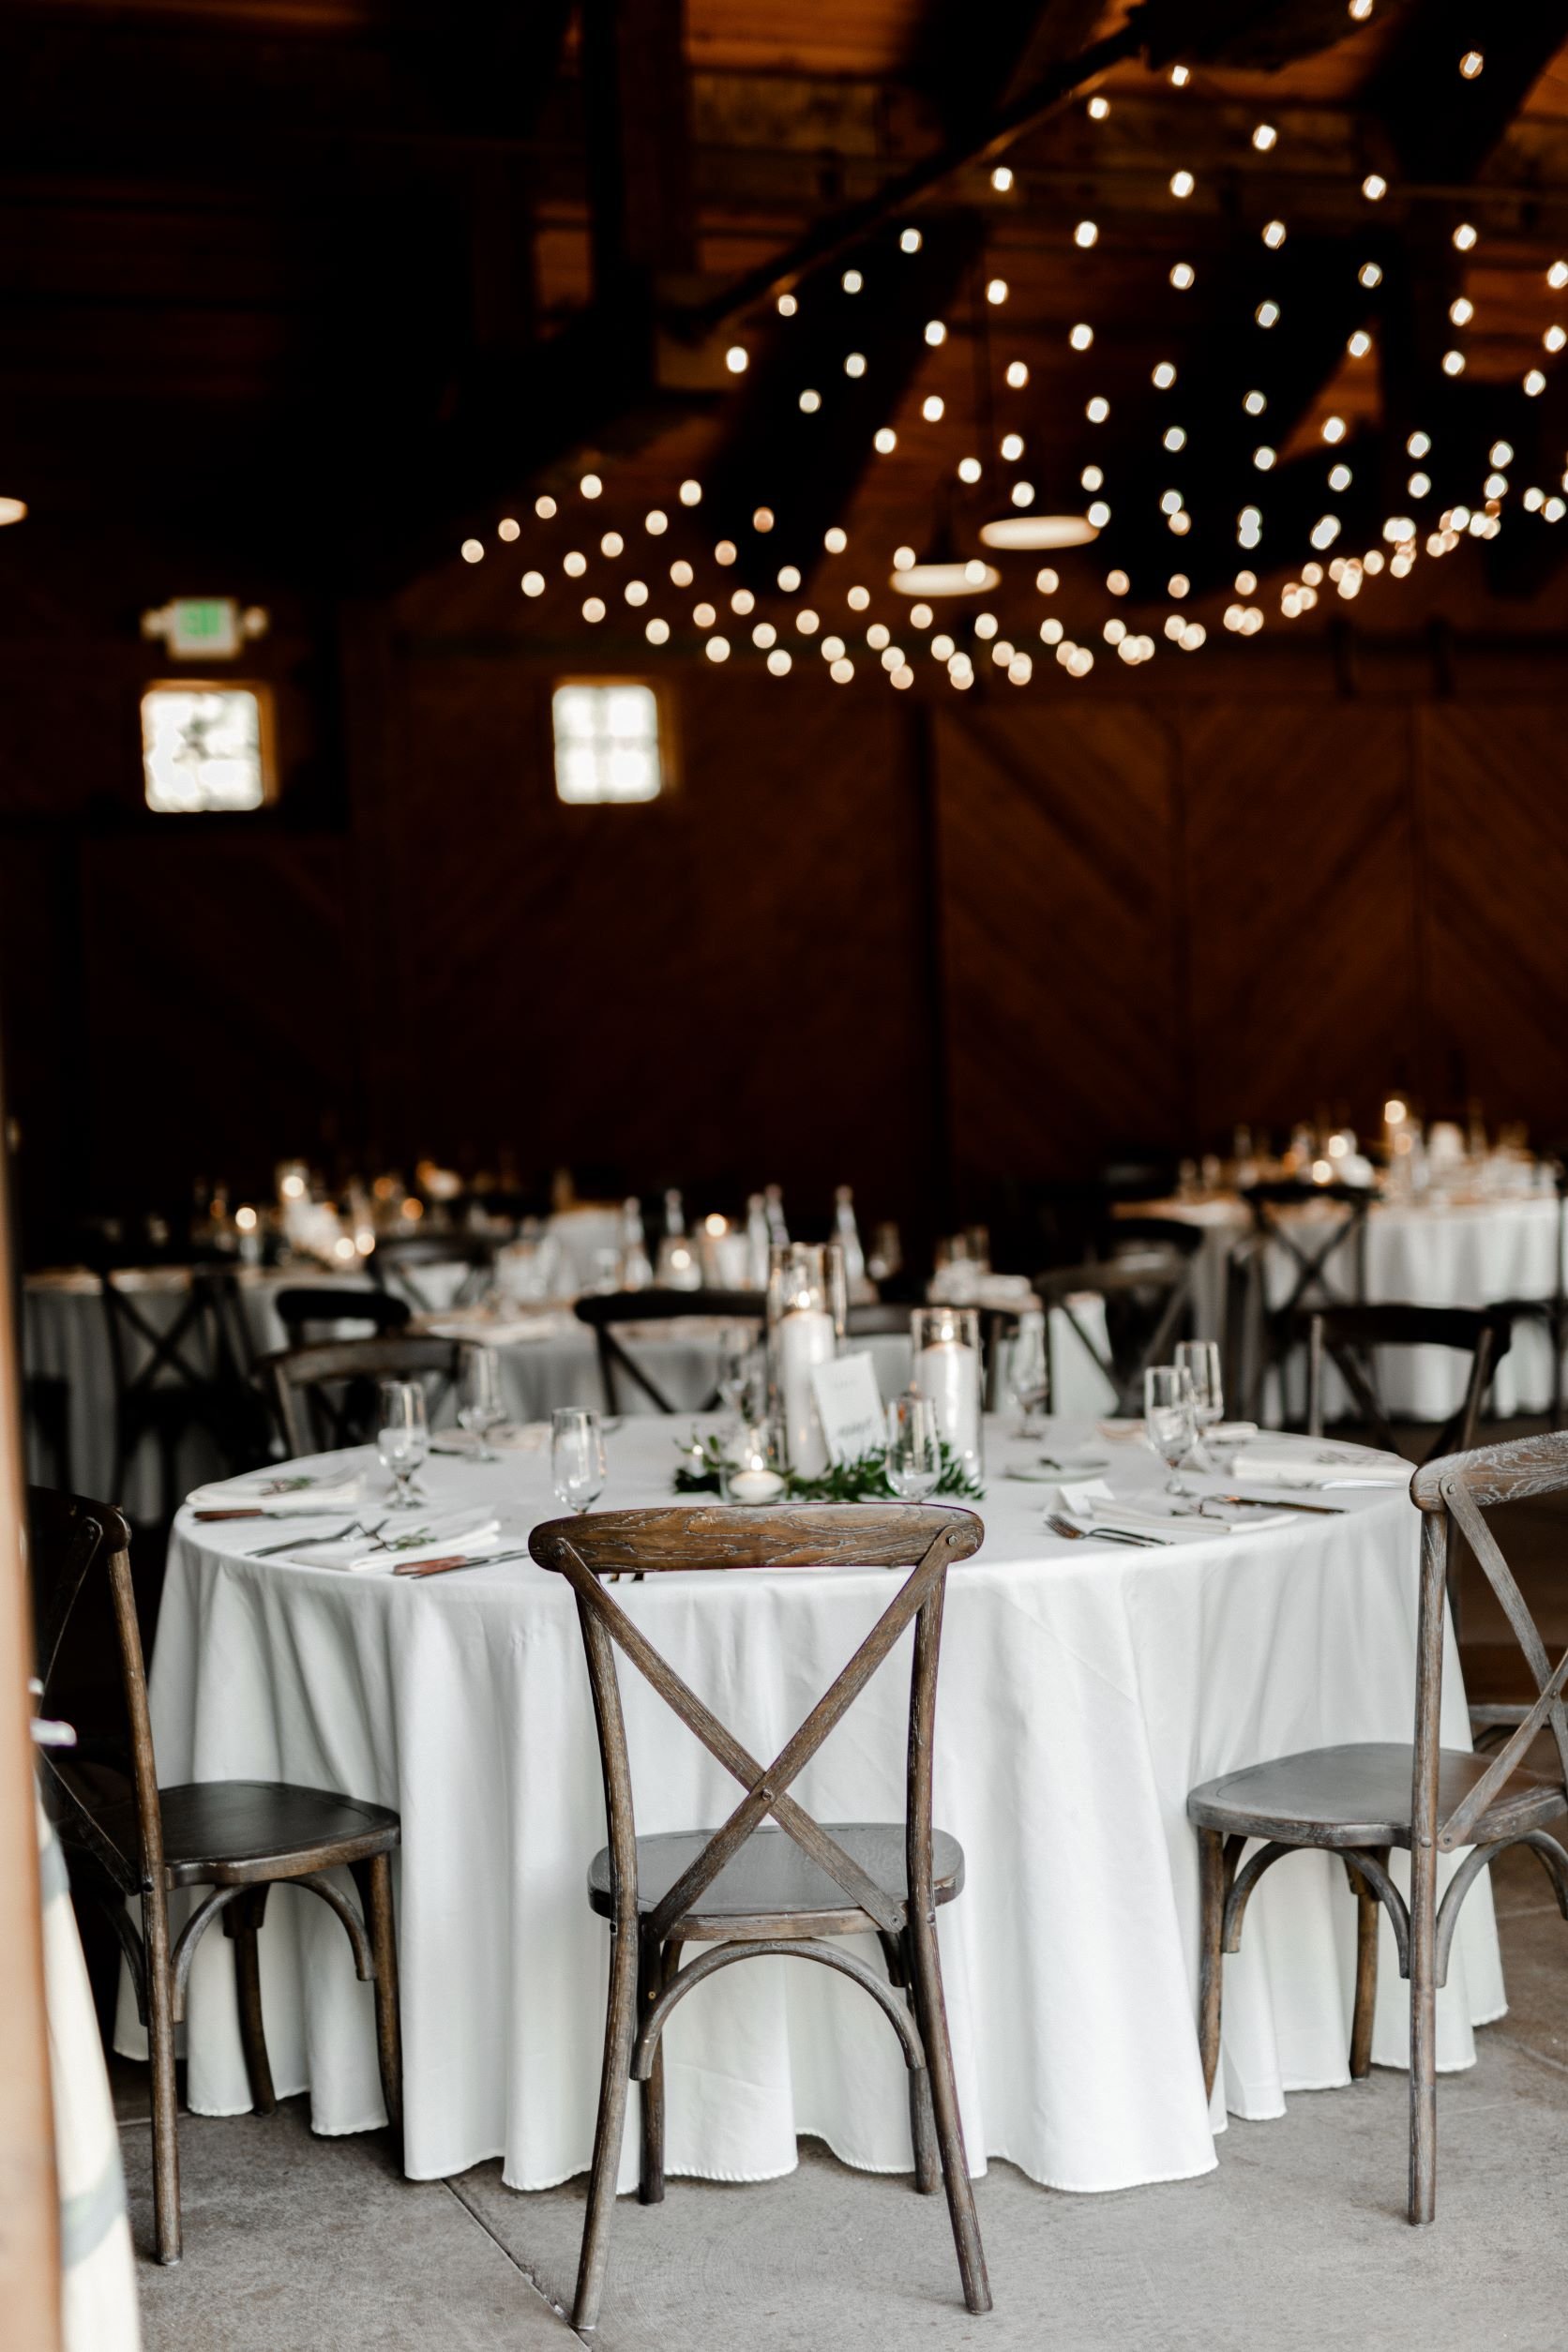 indoor-swiftwater-cellars-wedding-reception-with-vineyard-chairs-and-string-lights